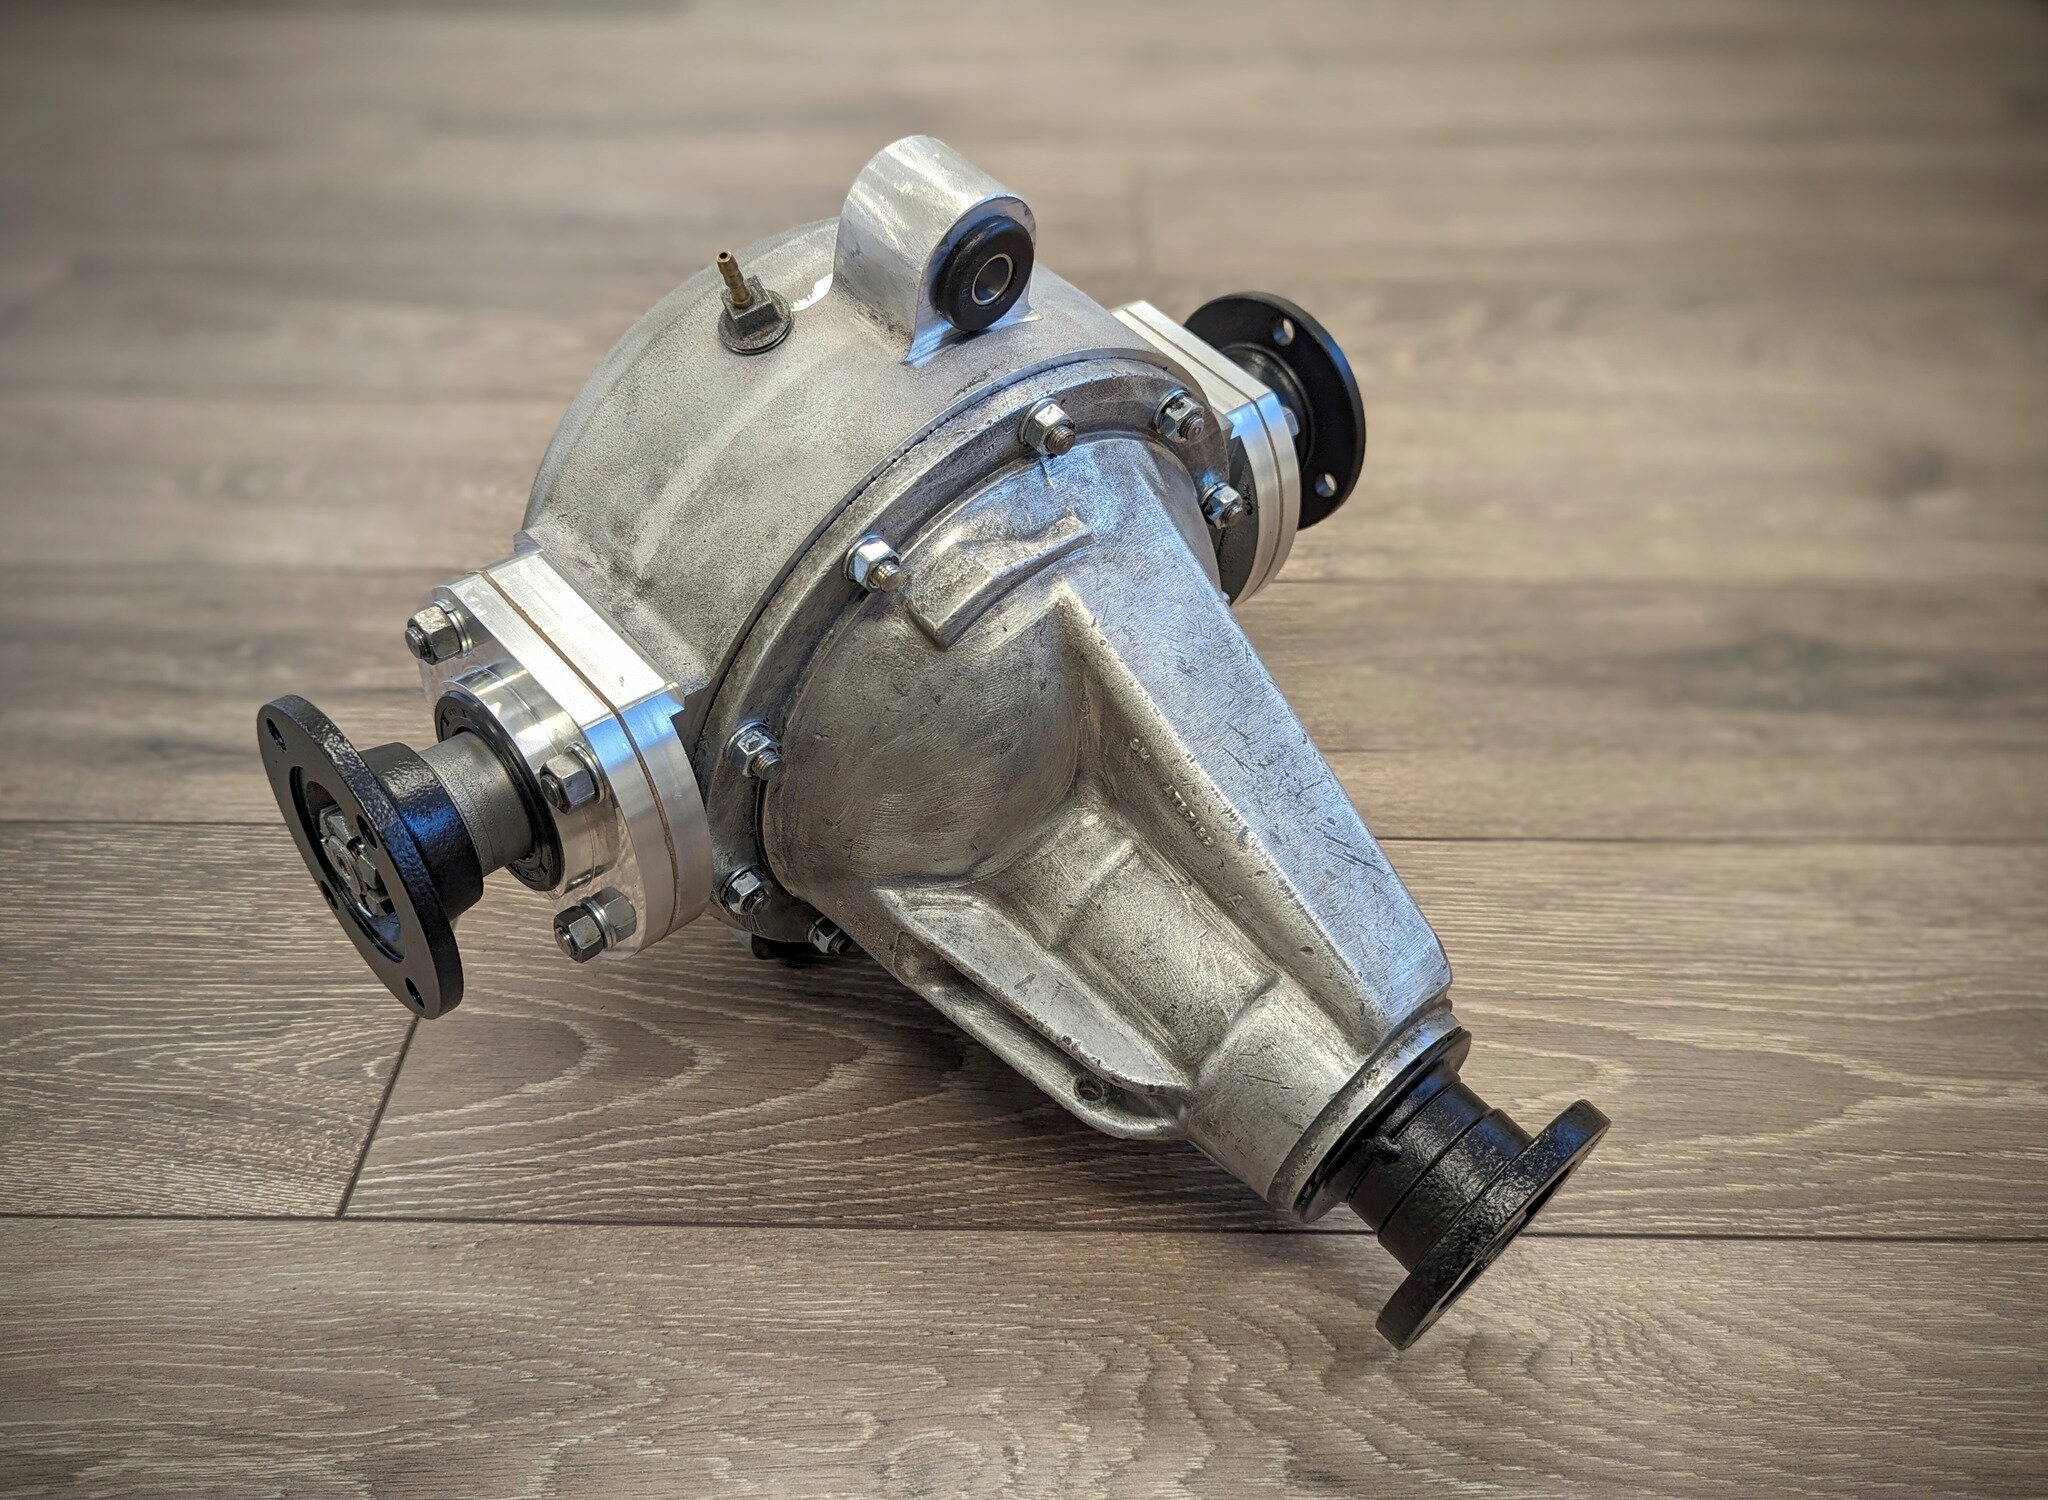 For Sale - TVR Grantura MK3 standard diff unit with 4.1:1 ratio, featuring a brand new TVR cast aluminium case, new oil seals, bearings and polyurethane mounting bushes. We can also rebuild your old diff or supply you with a new TVR case.

Visit www.